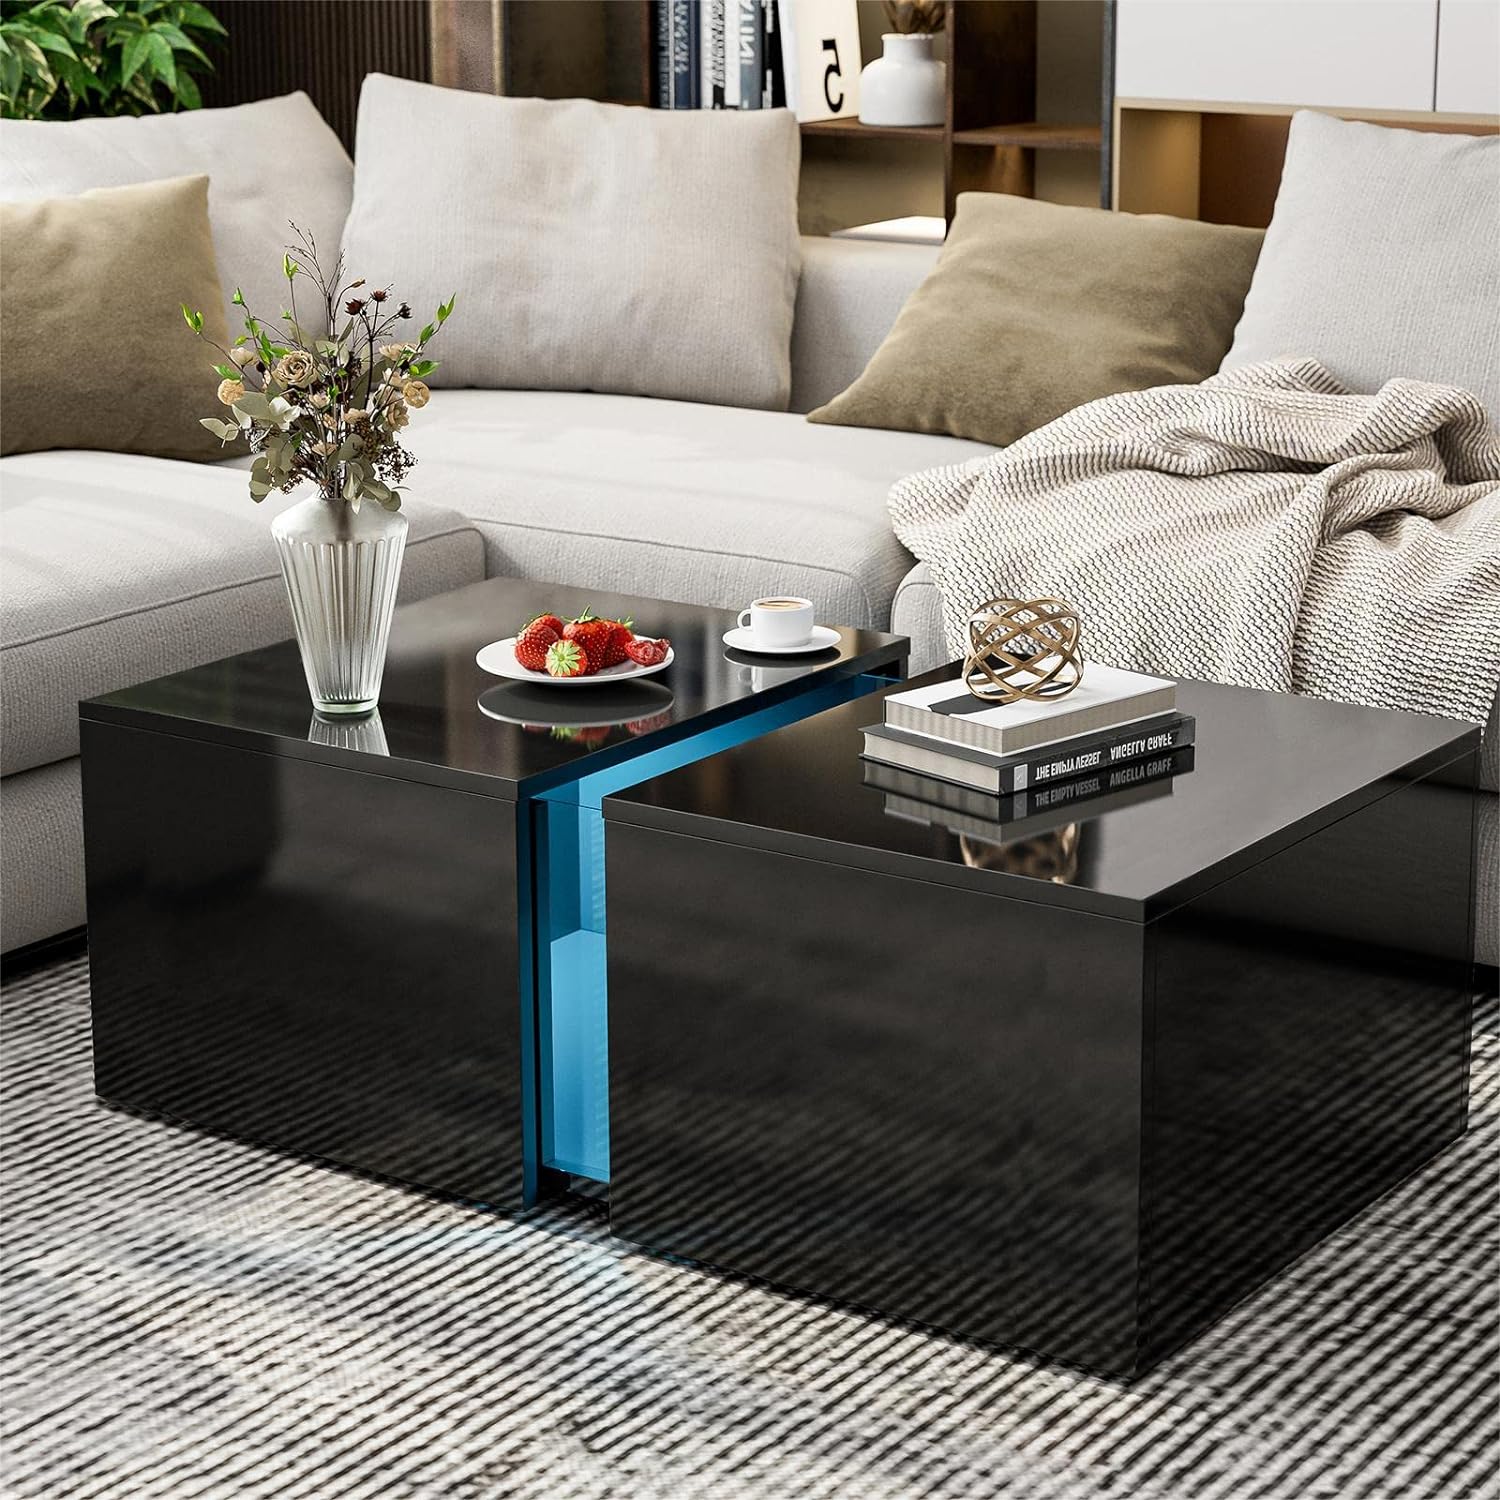 IKIFLY Black LED Coffee Table, Modern Coffee Tables for Living Room with Storage Space & 16-Color LED Lights